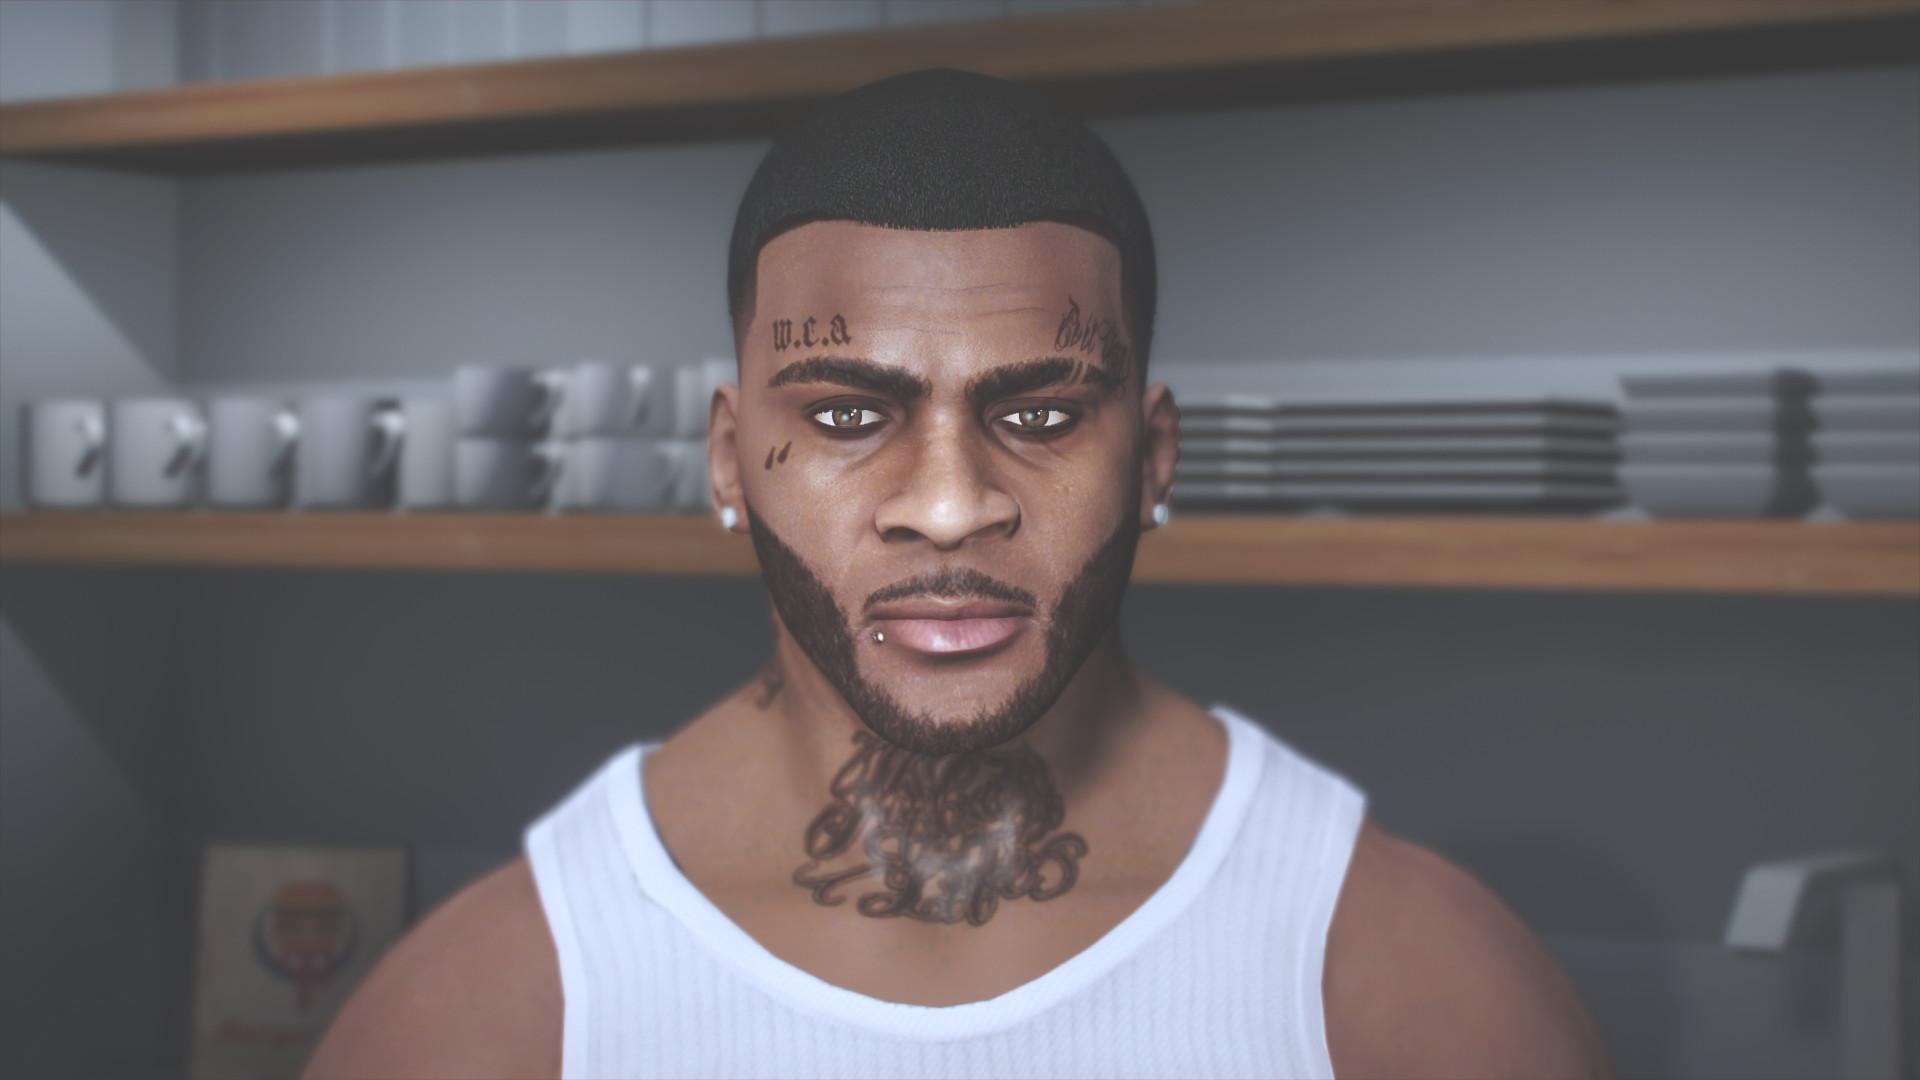 New Face For Franklin Gta5 4817